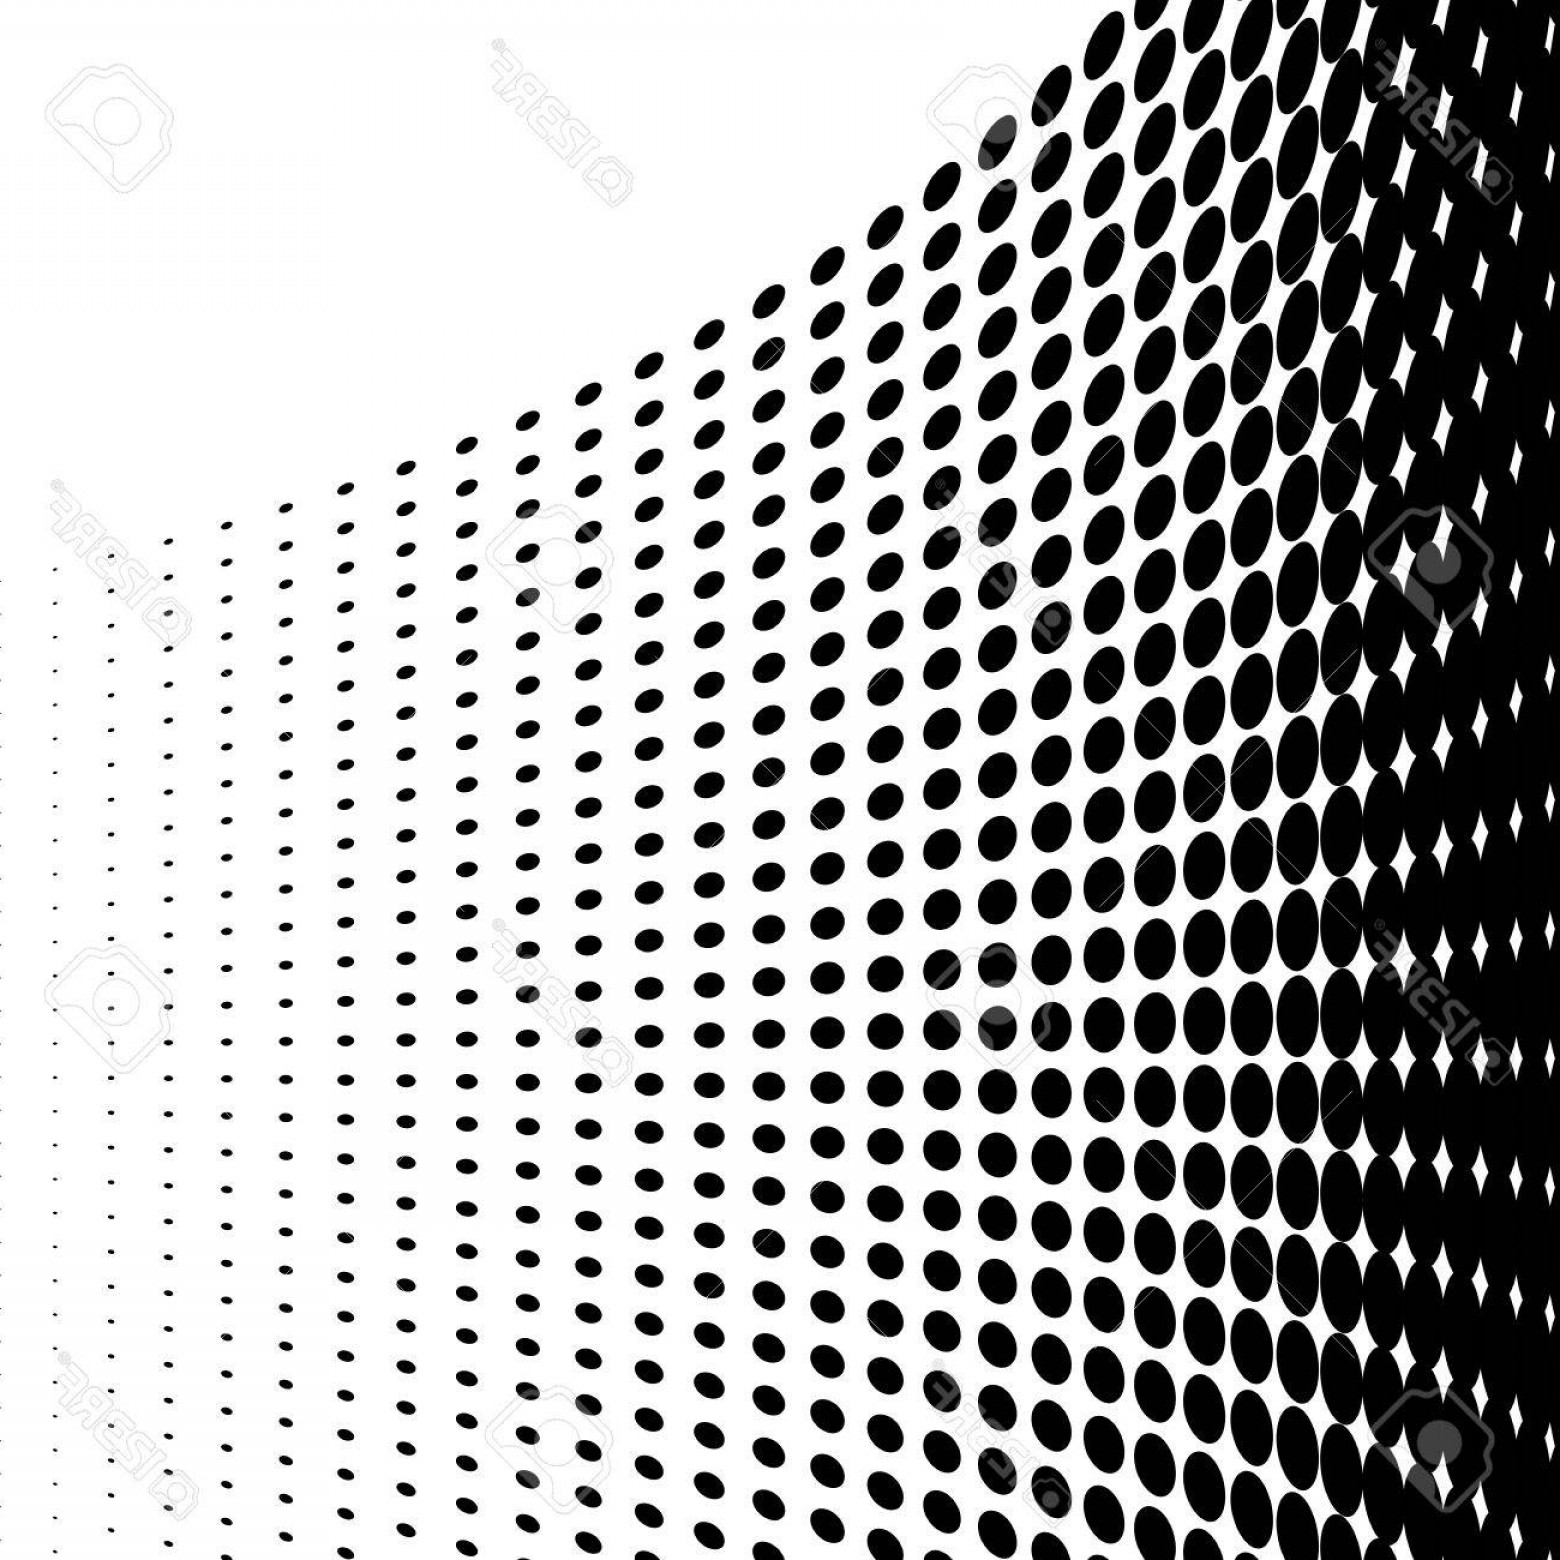 The best free Halftone vector images. Download from 580 free vectors of